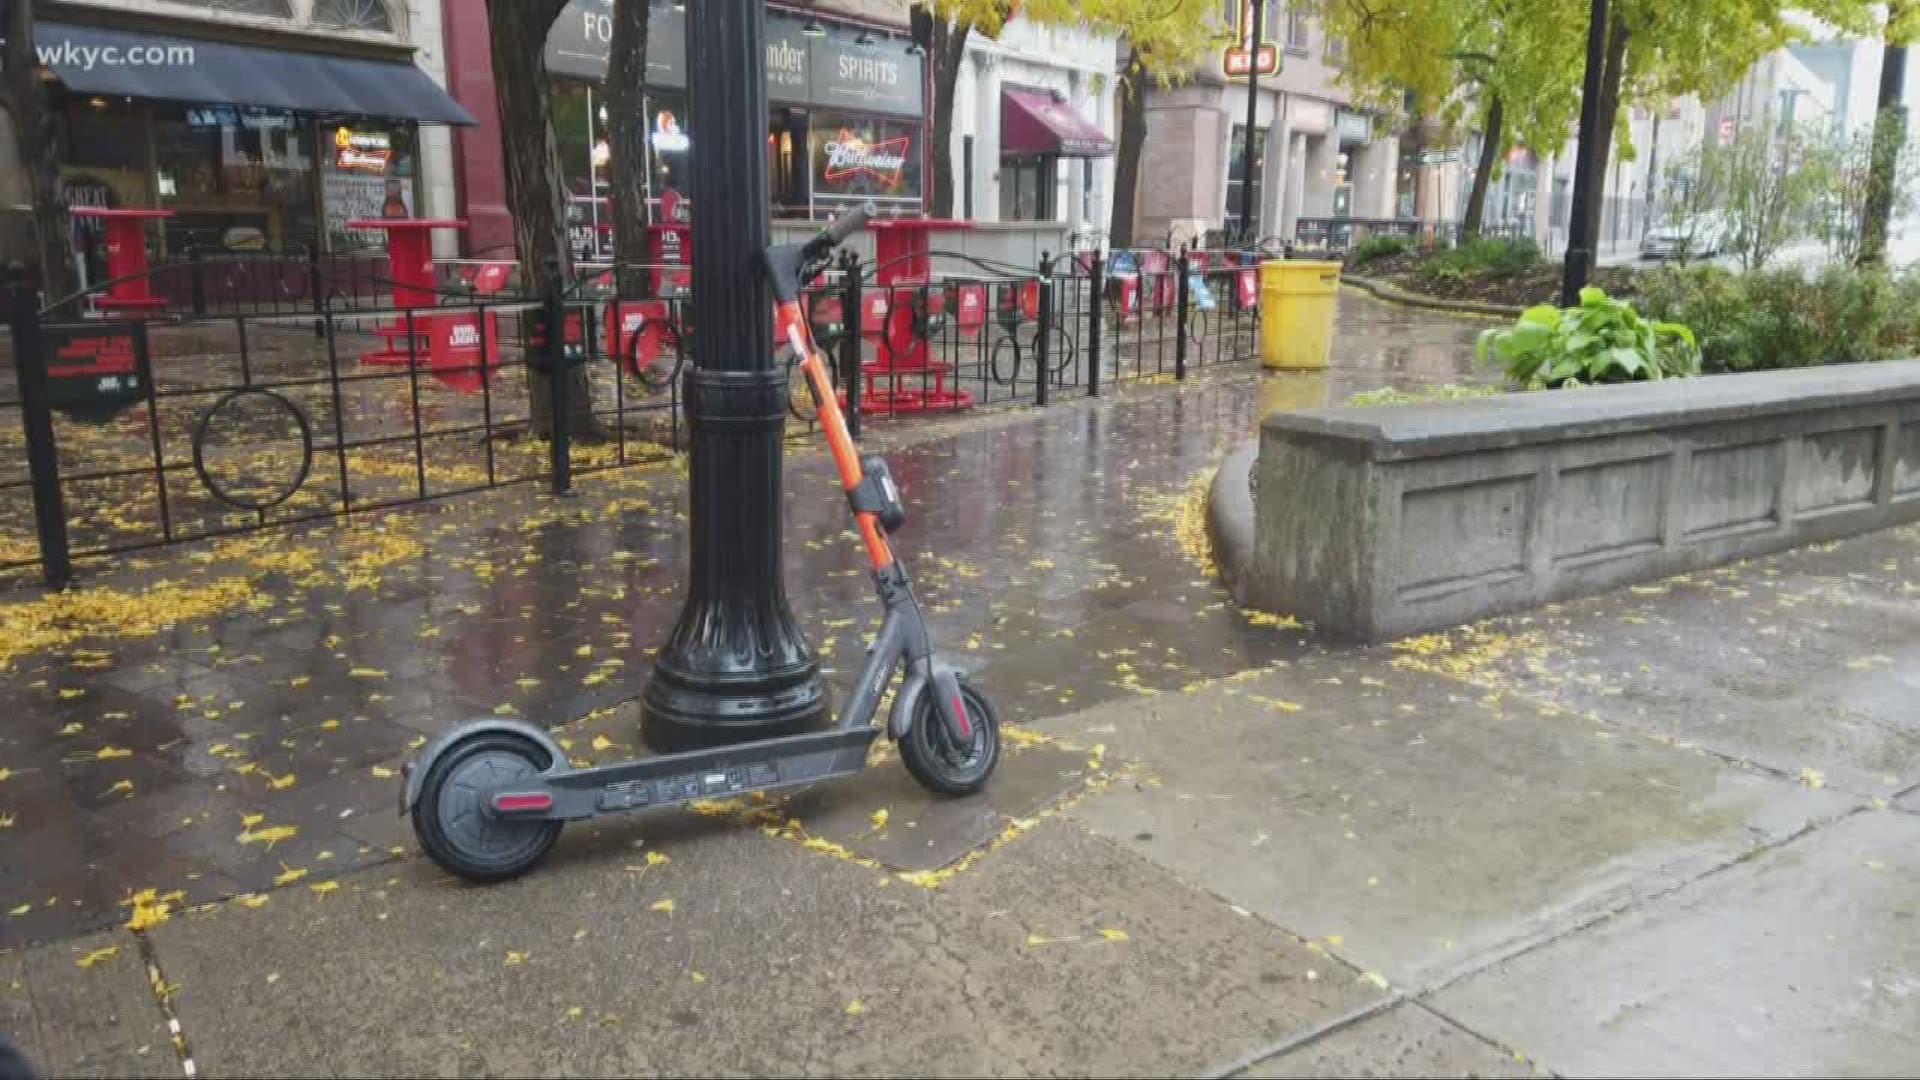 When the scooters got here, the weather was great. But will they stay now that the weather is taking a turn for the worst?